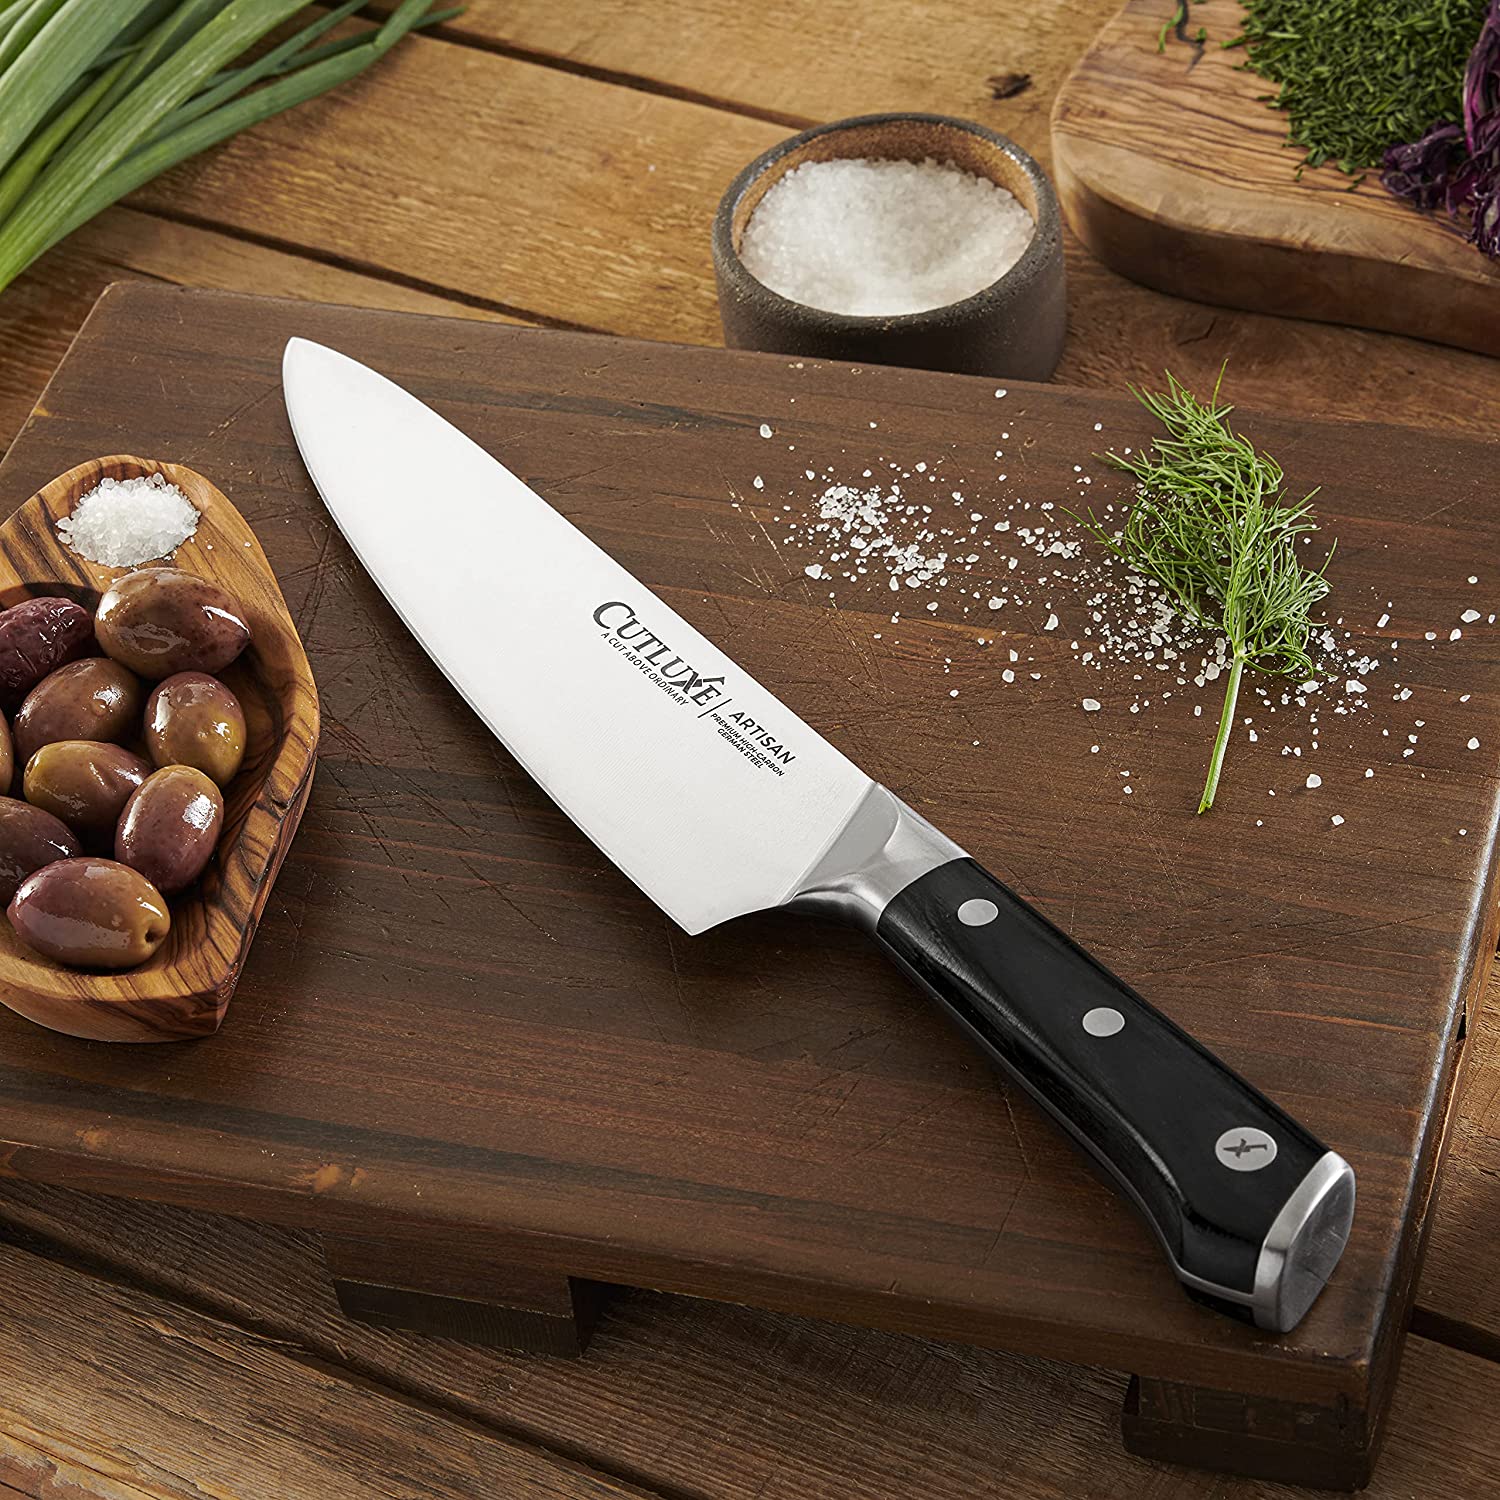 Professional Cutlery - 8 Inch Stainless Steel Chef Knife - Backed by a -  Kitchintelligence